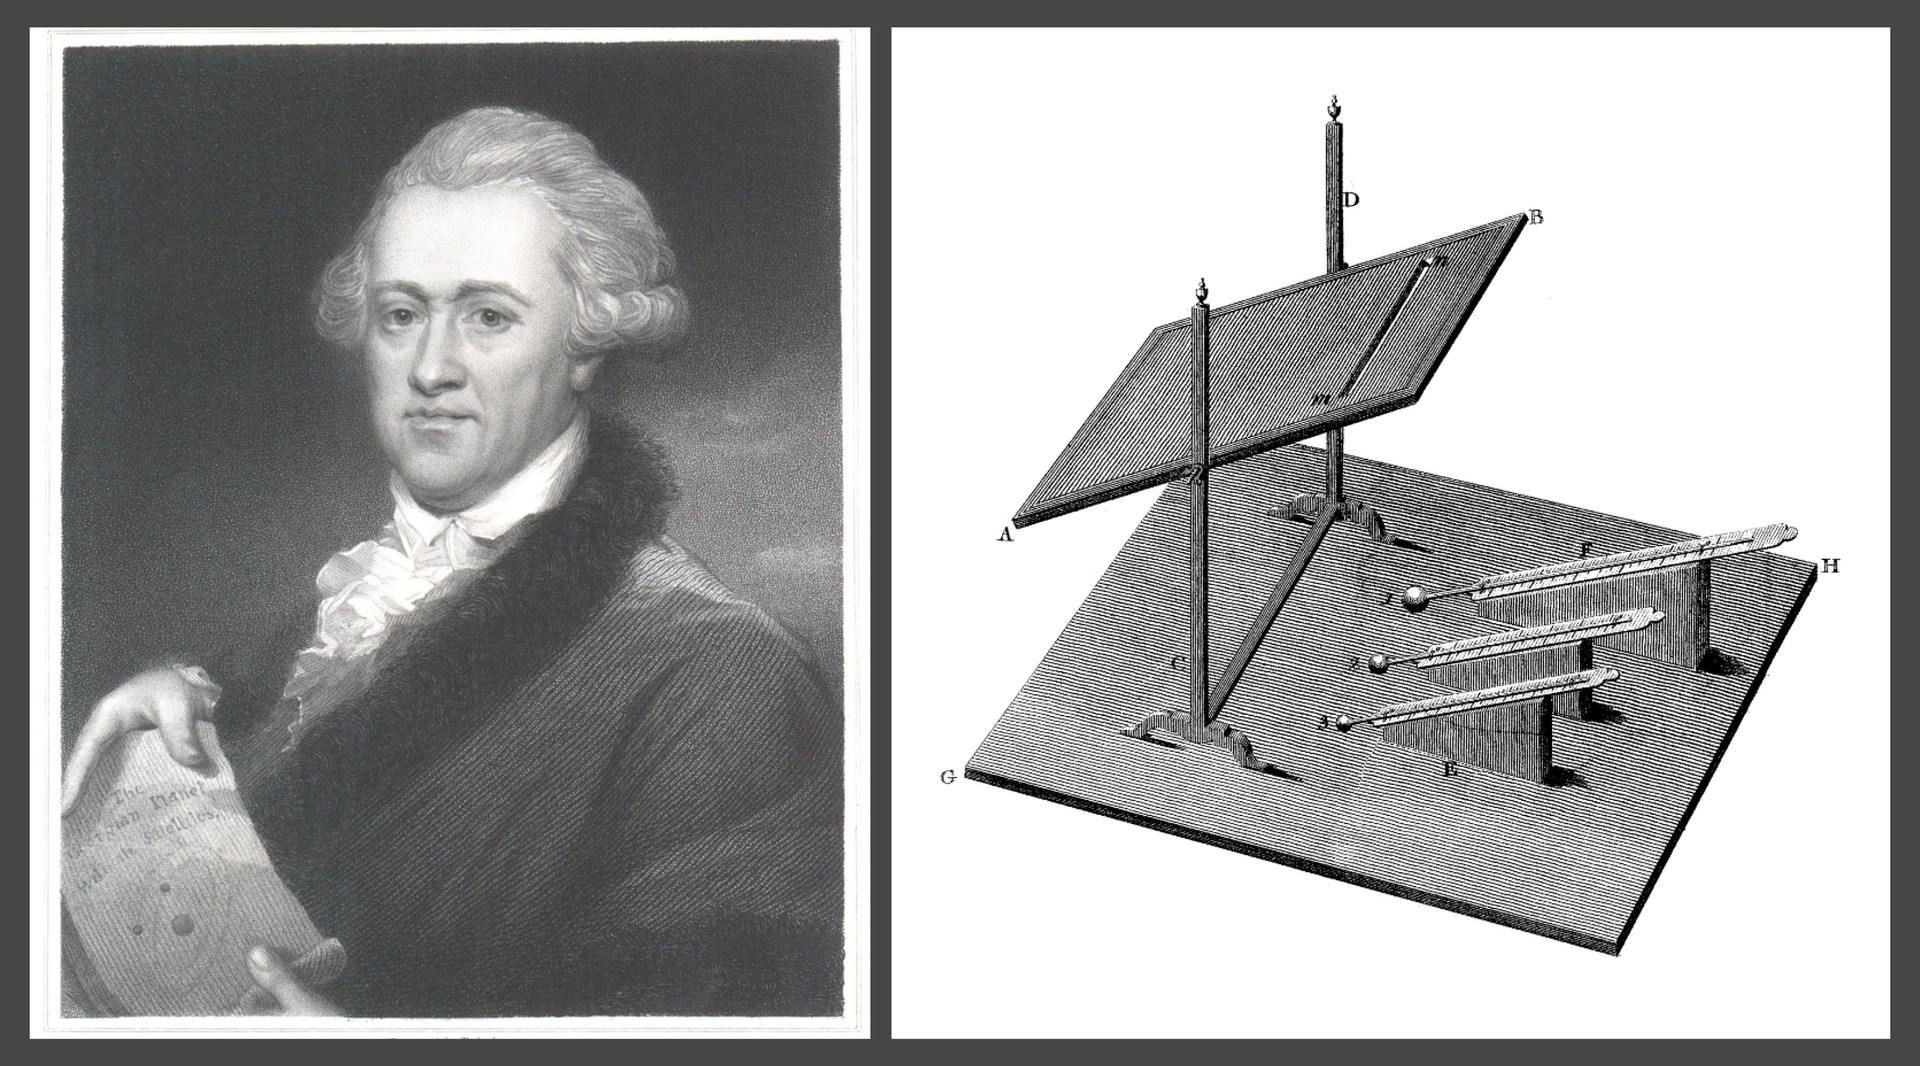 Photo of William Herschel and his experiments on the nature of light